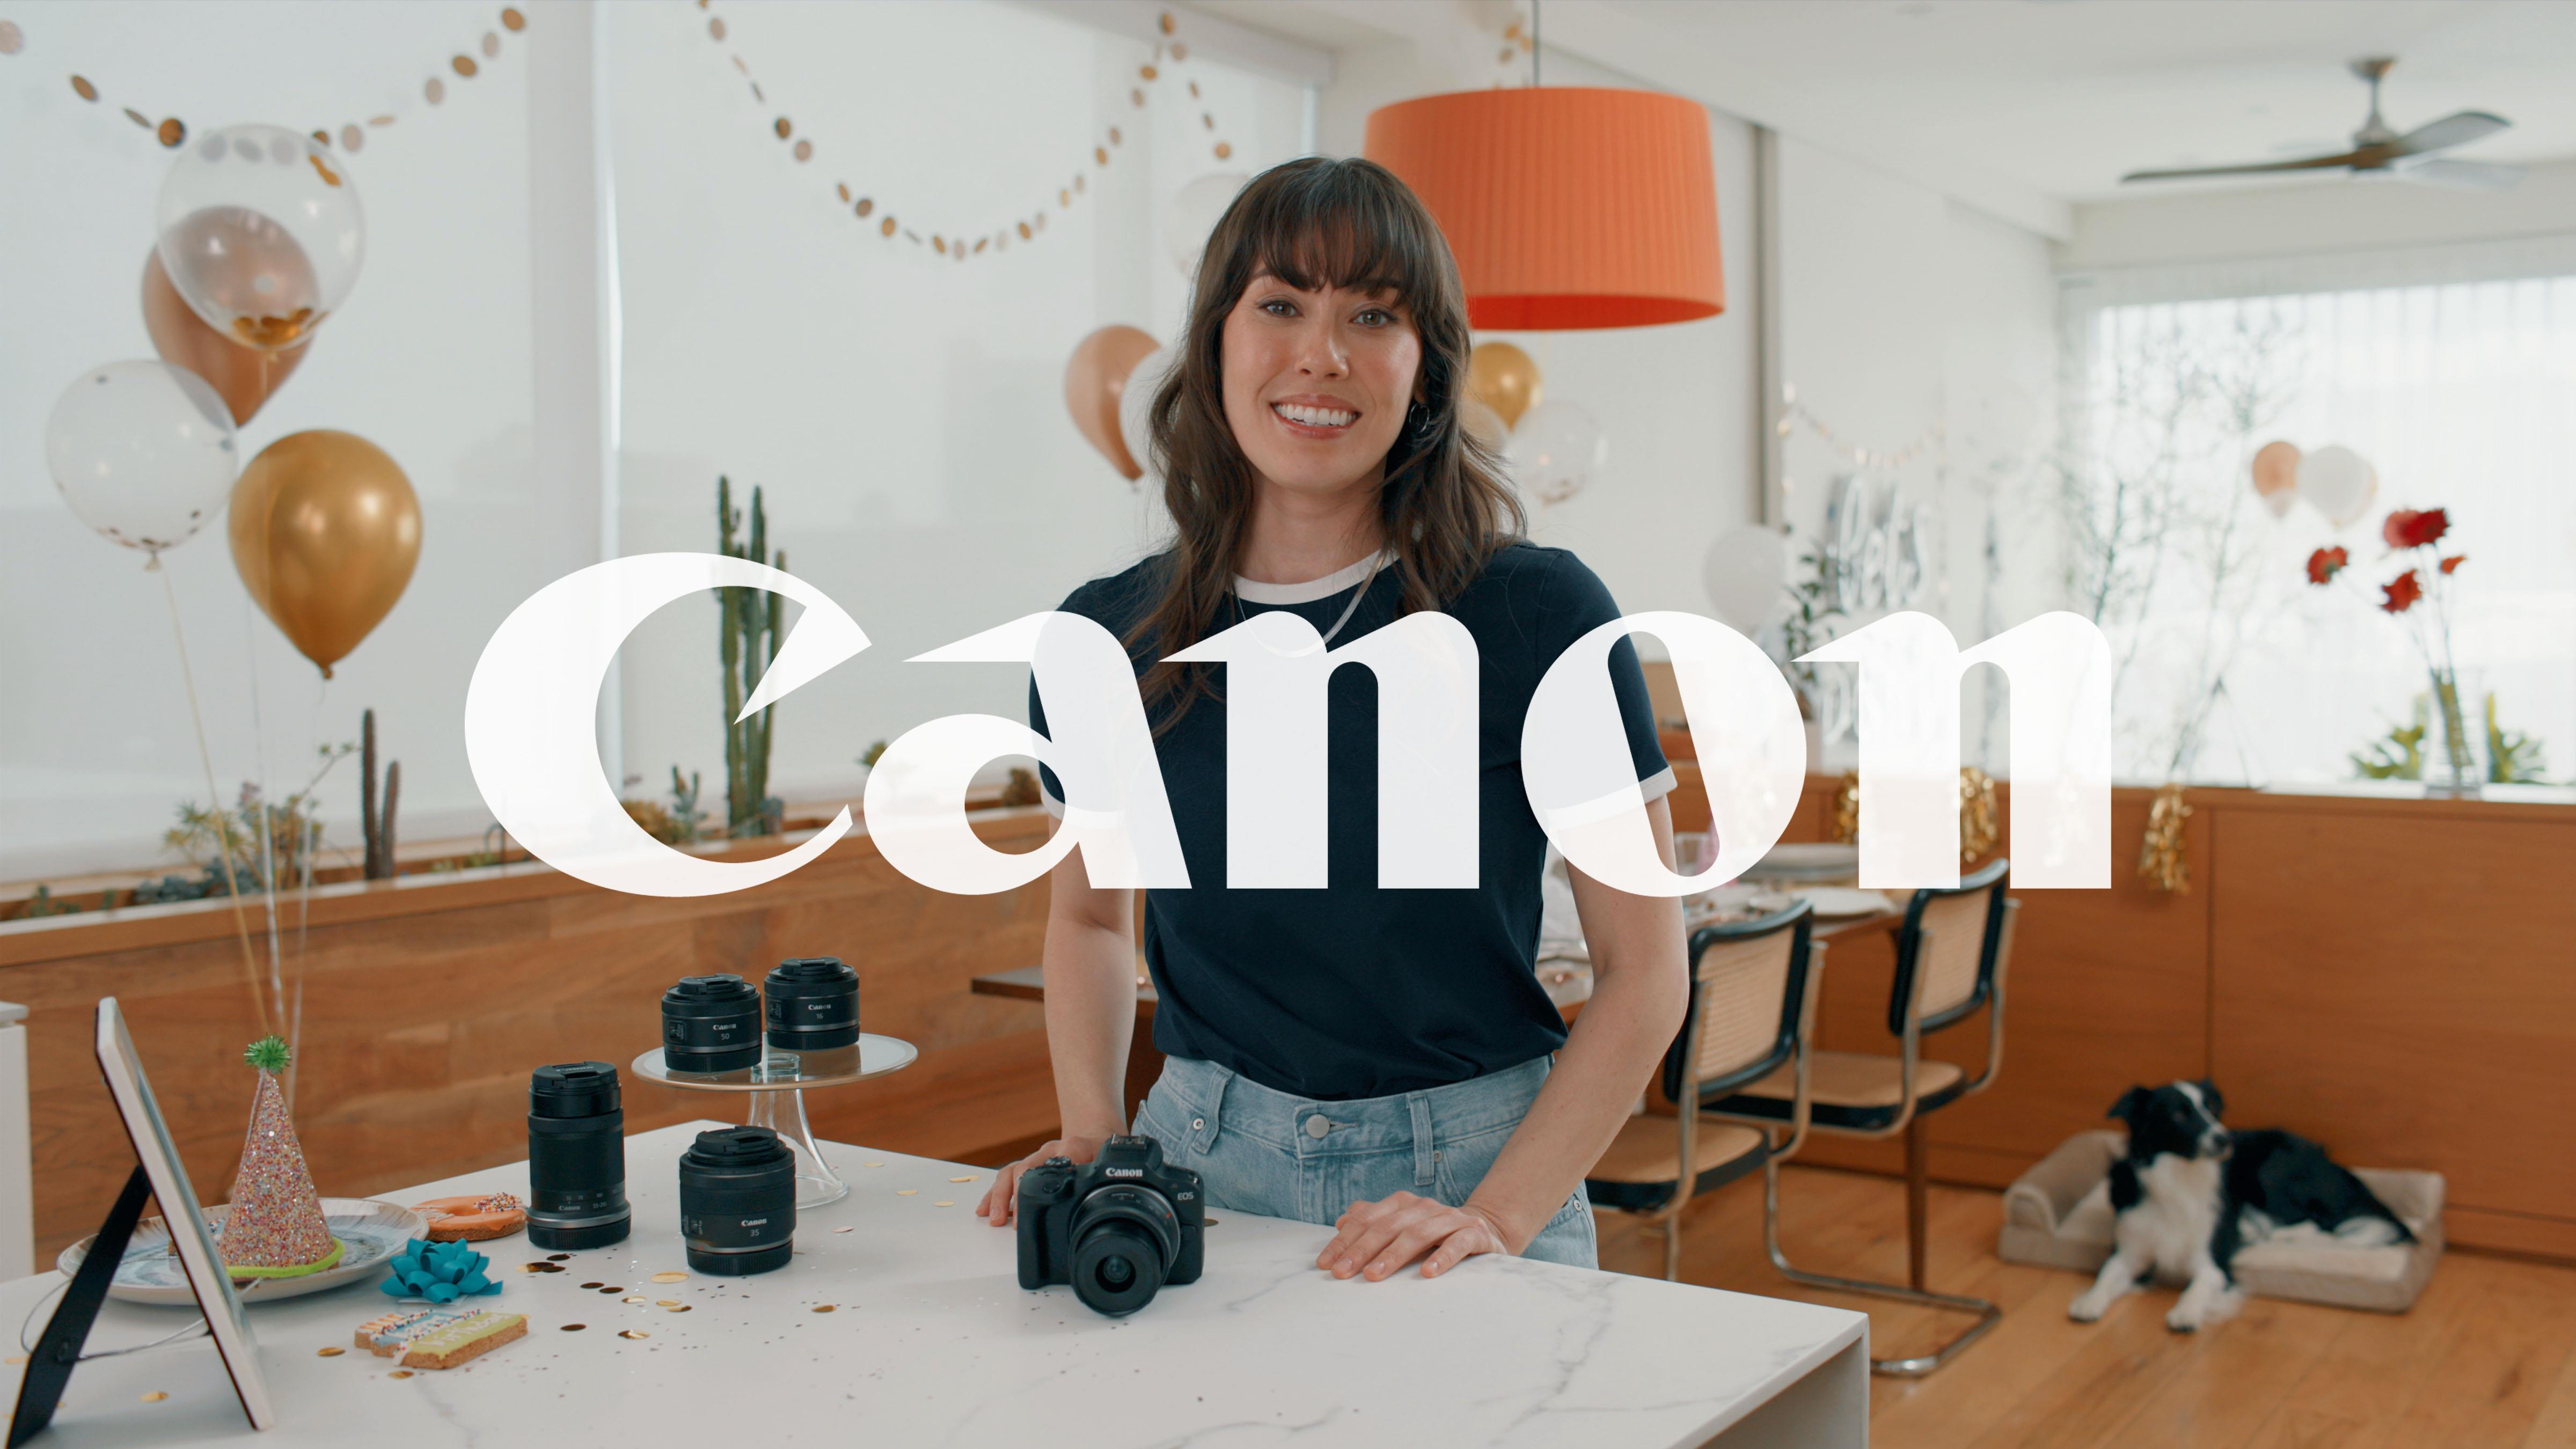 The New Canon EOS R100: Turn Moments Into Memories